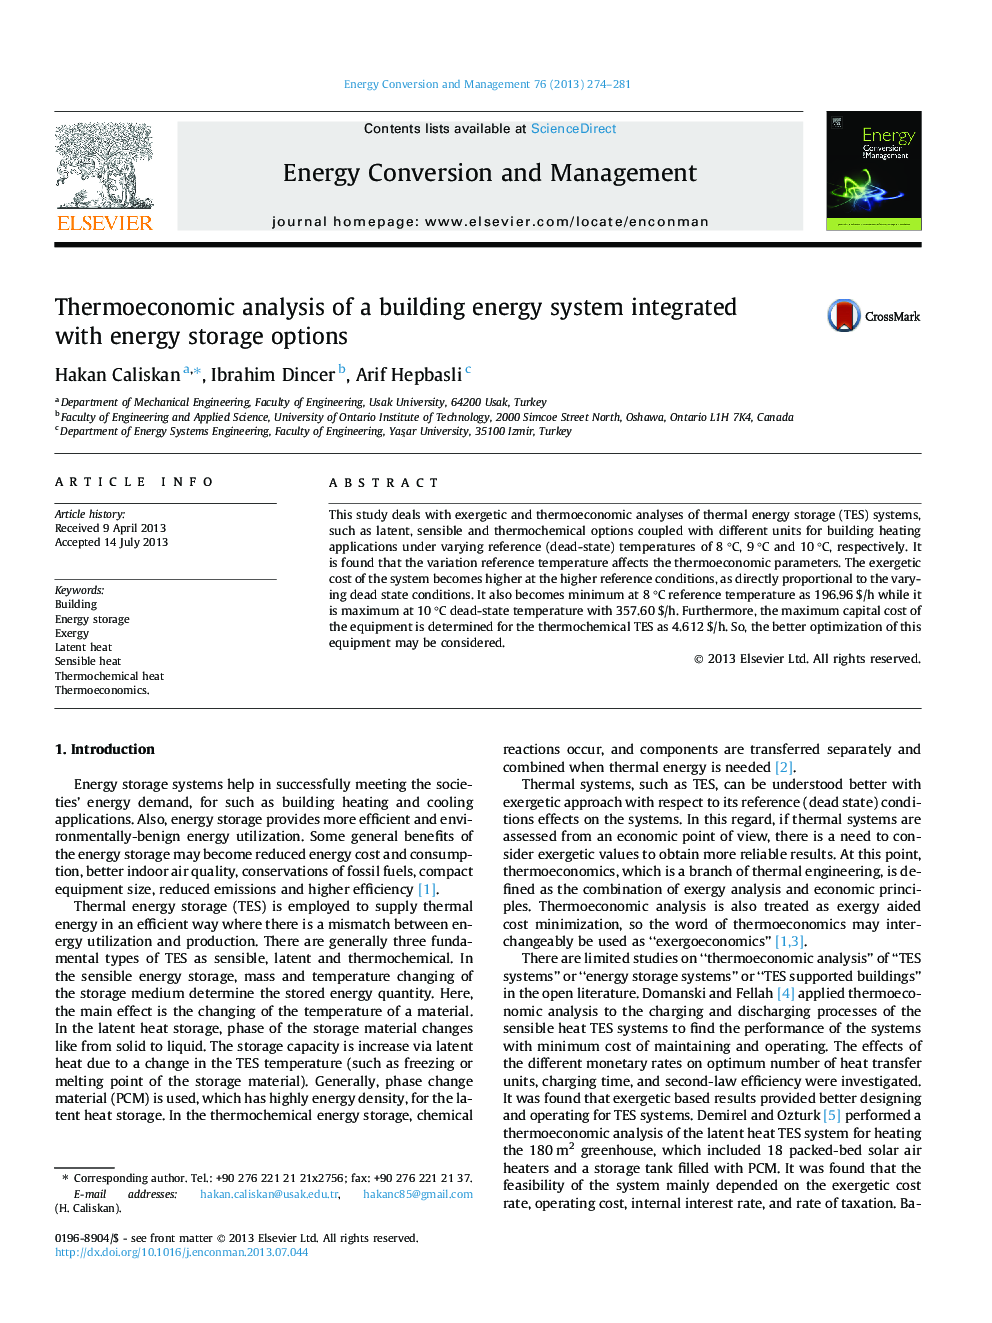 Thermoeconomic analysis of a building energy system integrated with energy storage options